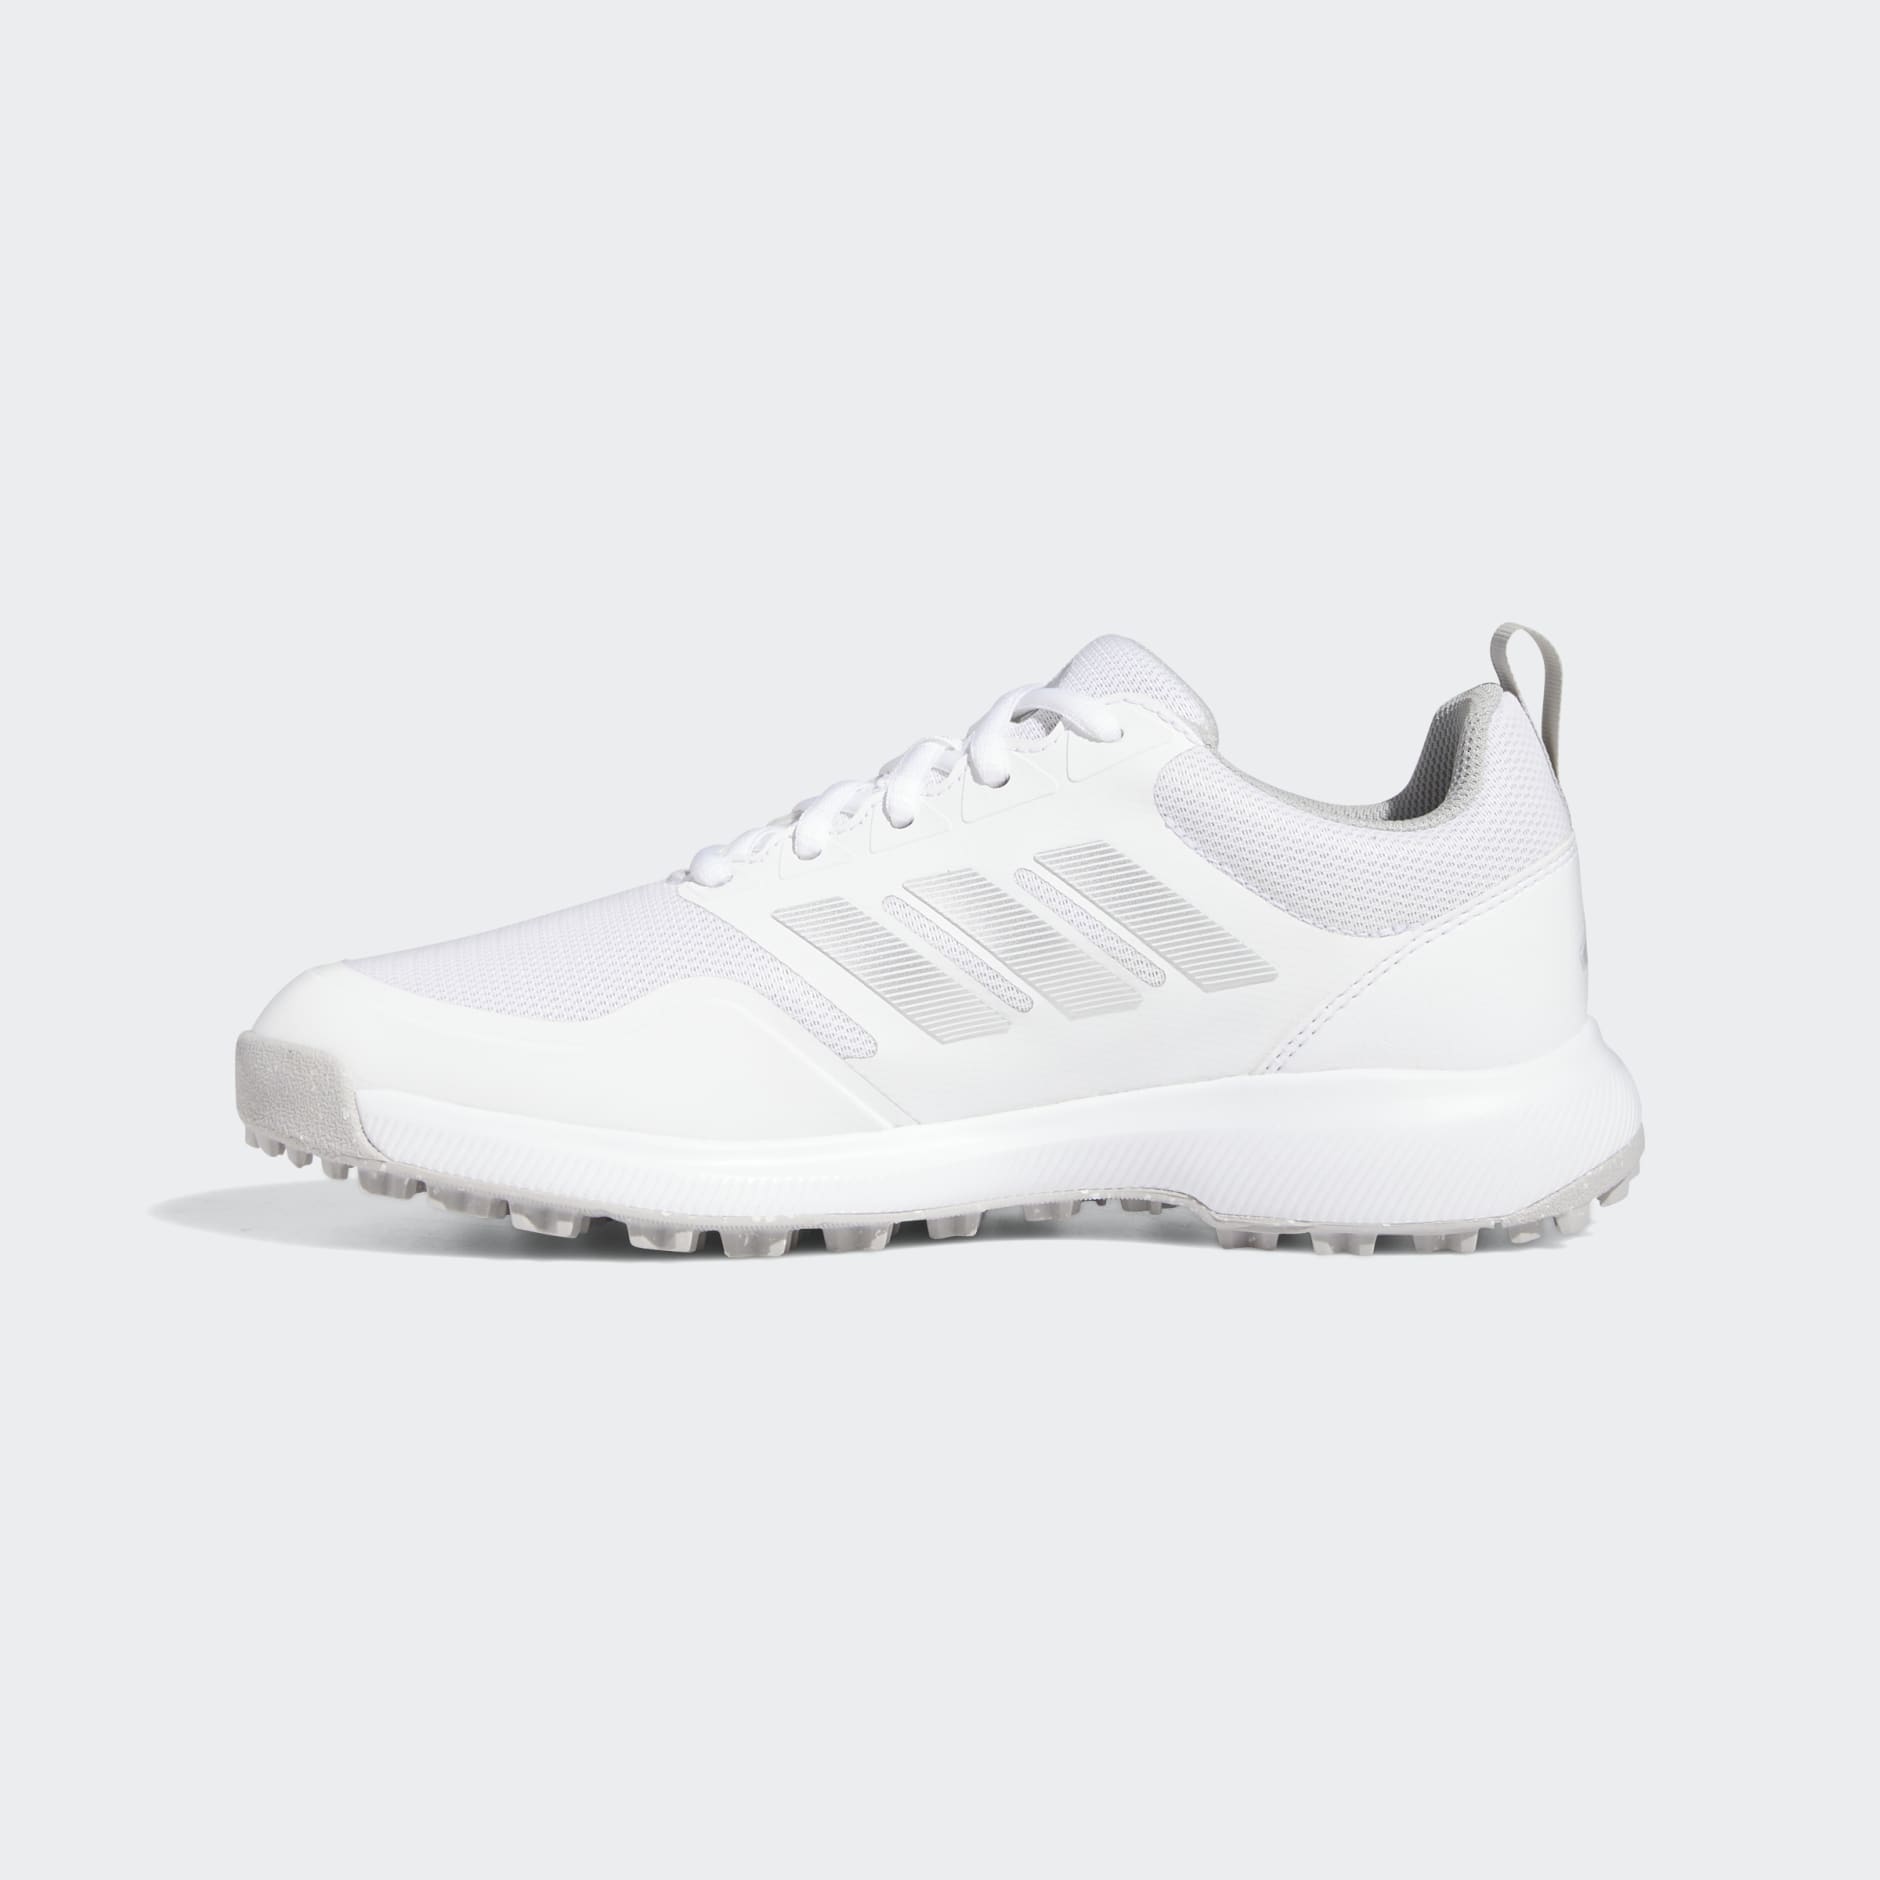 Shoes - Tech Response SL 3.0 Golf Shoes - White | adidas South Africa